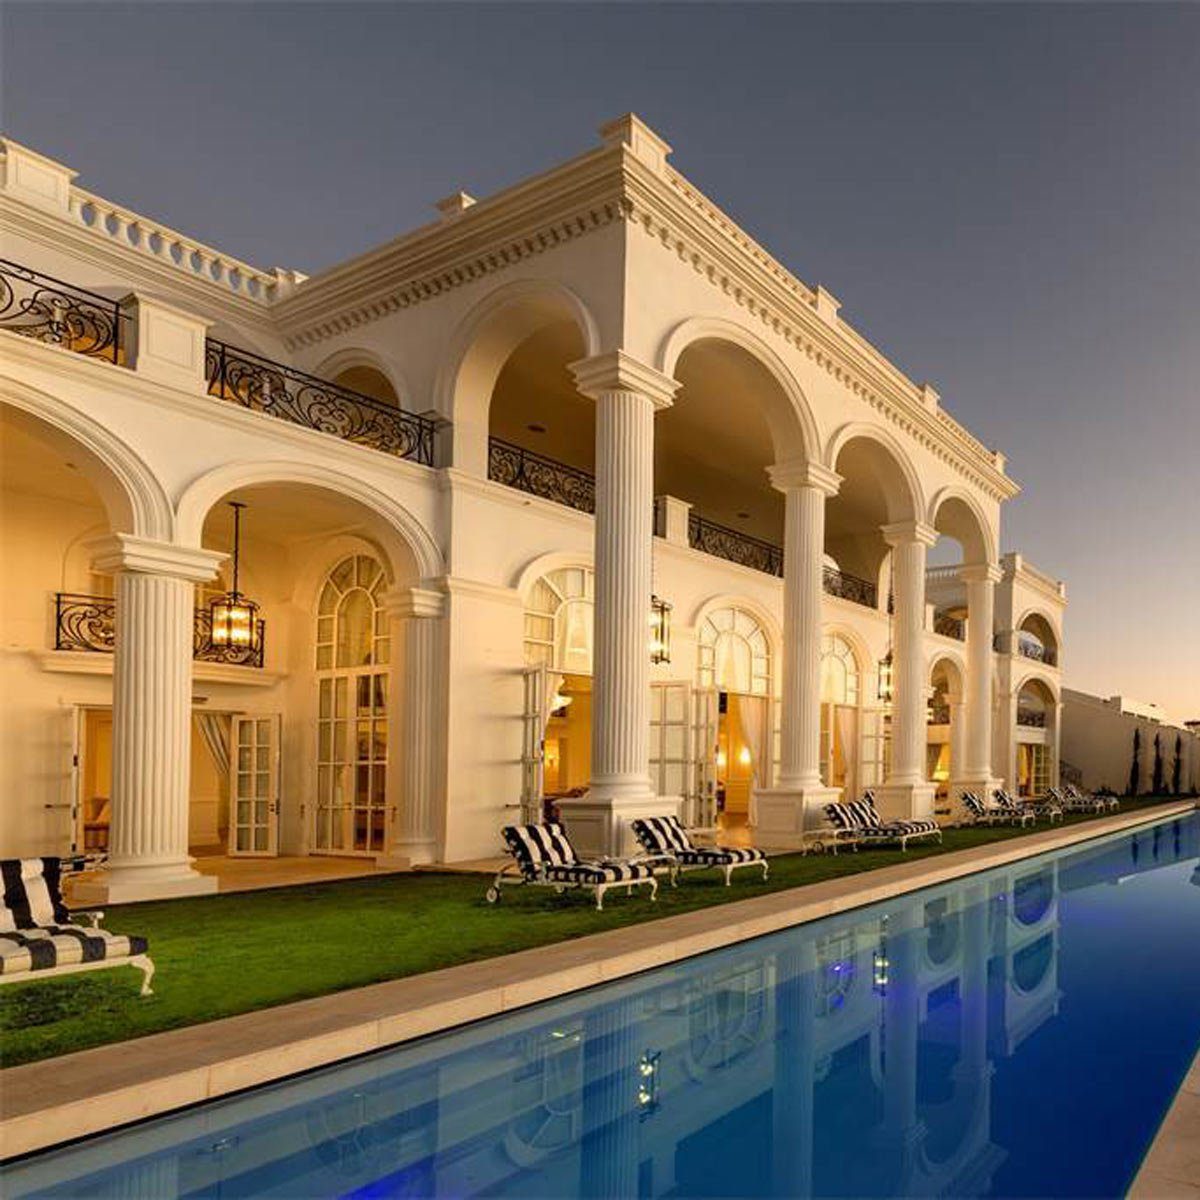 Mansion with a pool in front in South Africa